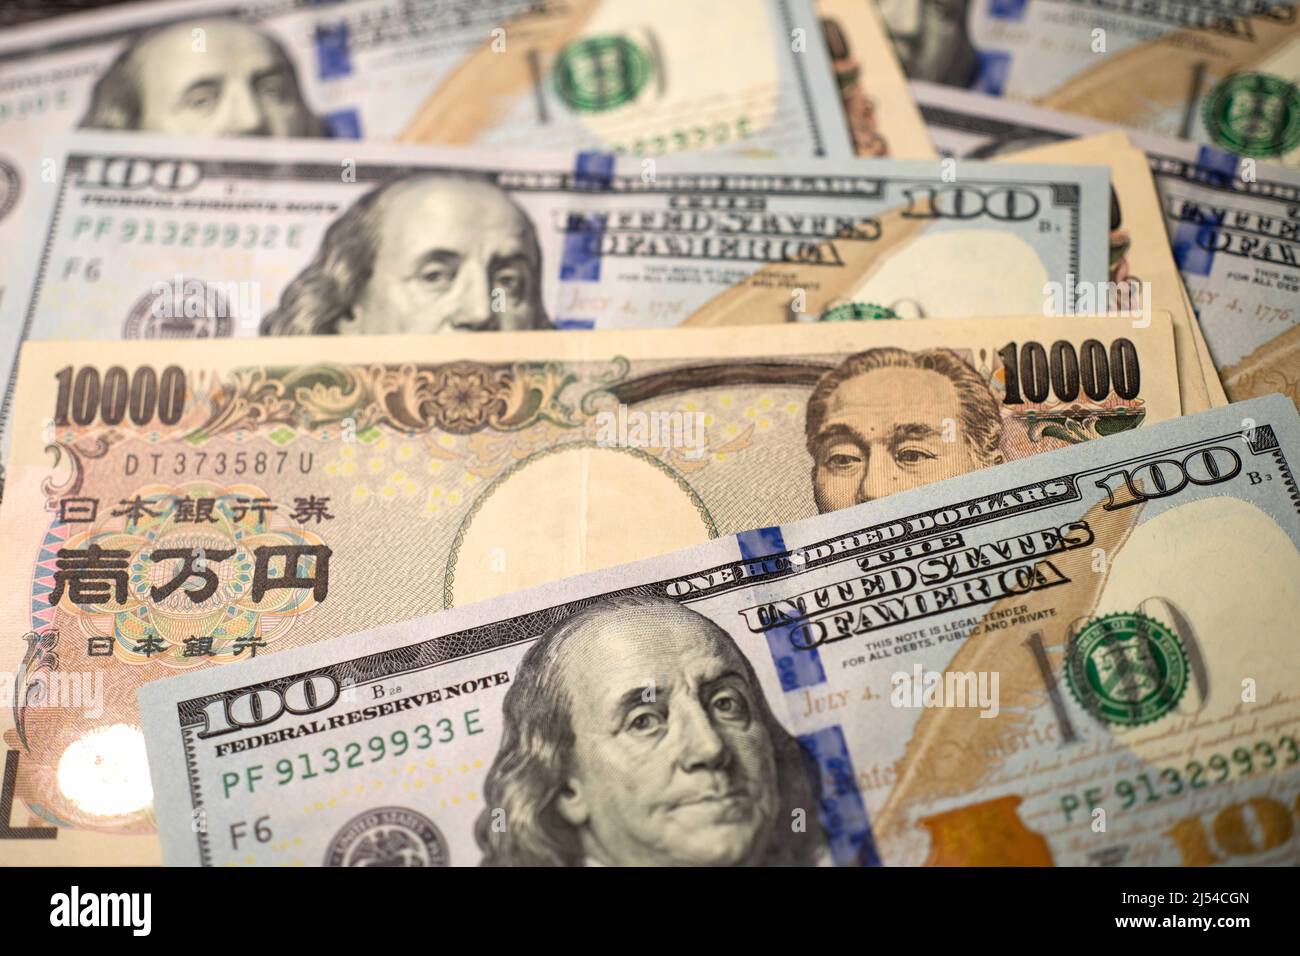 Tokyo. 20th Apr, 2022. Photo taken on April 20, 2022 shows the Japanese yen and U.S. dollar banknotes in Tokyo, Japan. The Japanese yen has weakened markedly this year as major central banks in Europe and the United States have shifted monetary policies. Credit: Zhang Xiaoyu/Xinhua/Alamy Live News Stock Photo